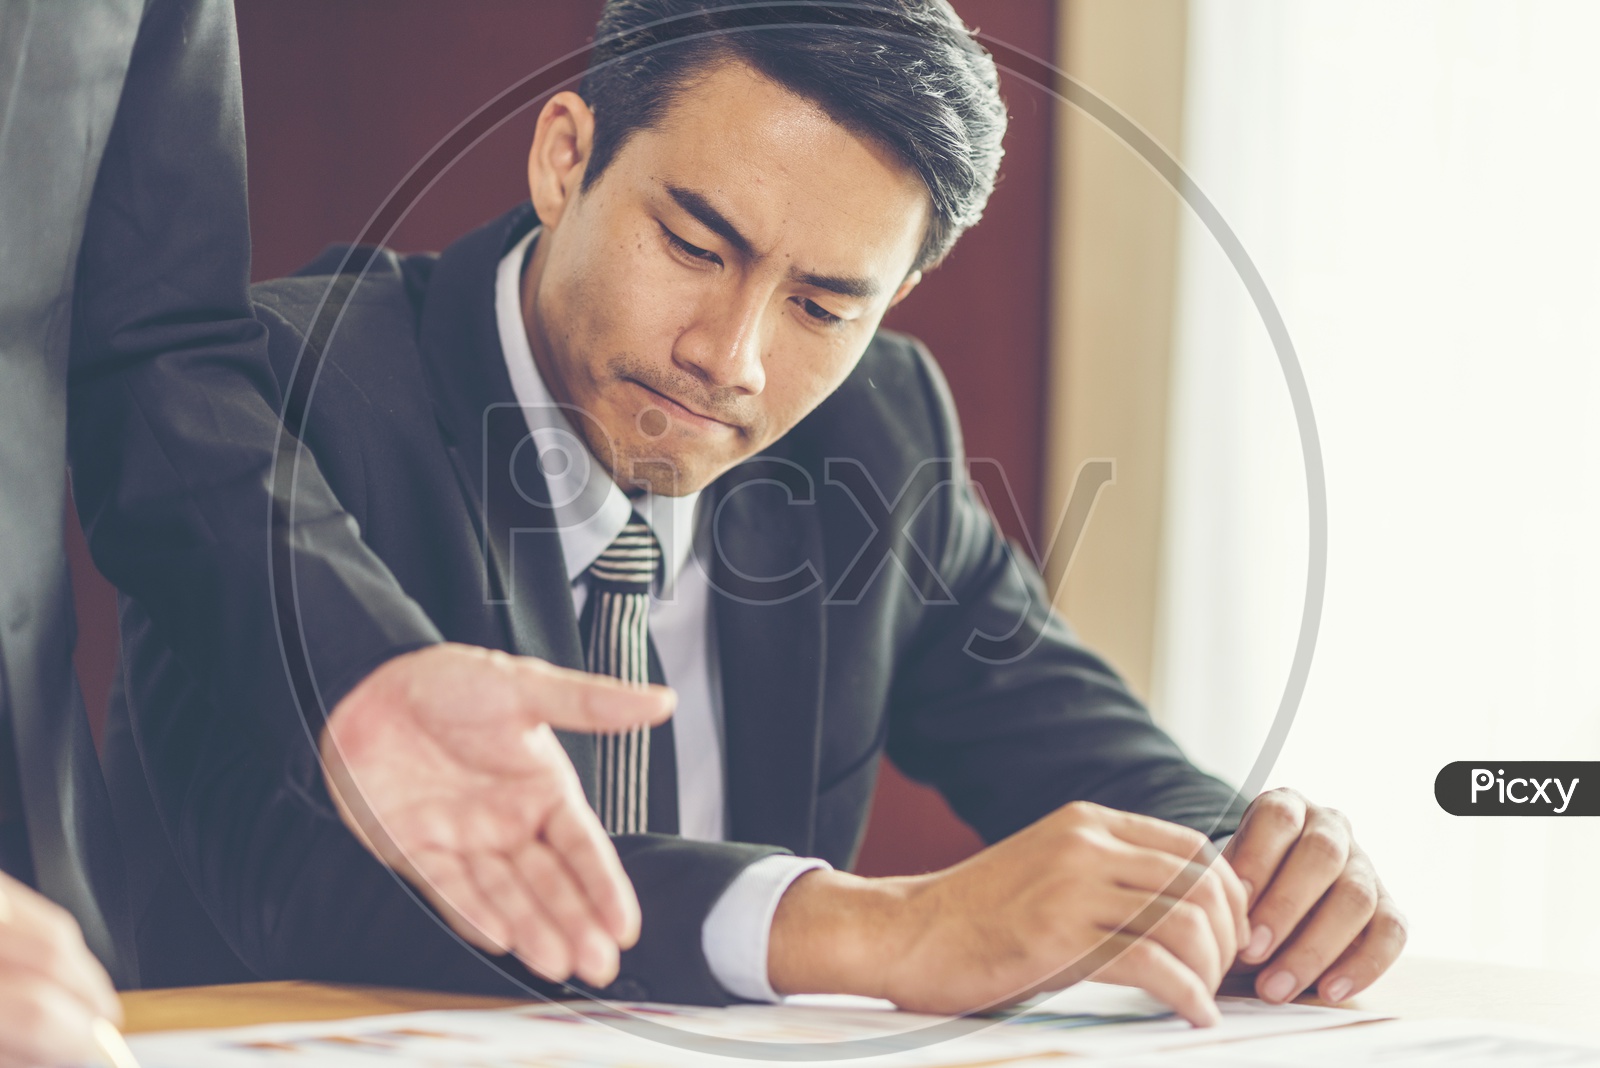 Professional man looking into the project documents shown by another person